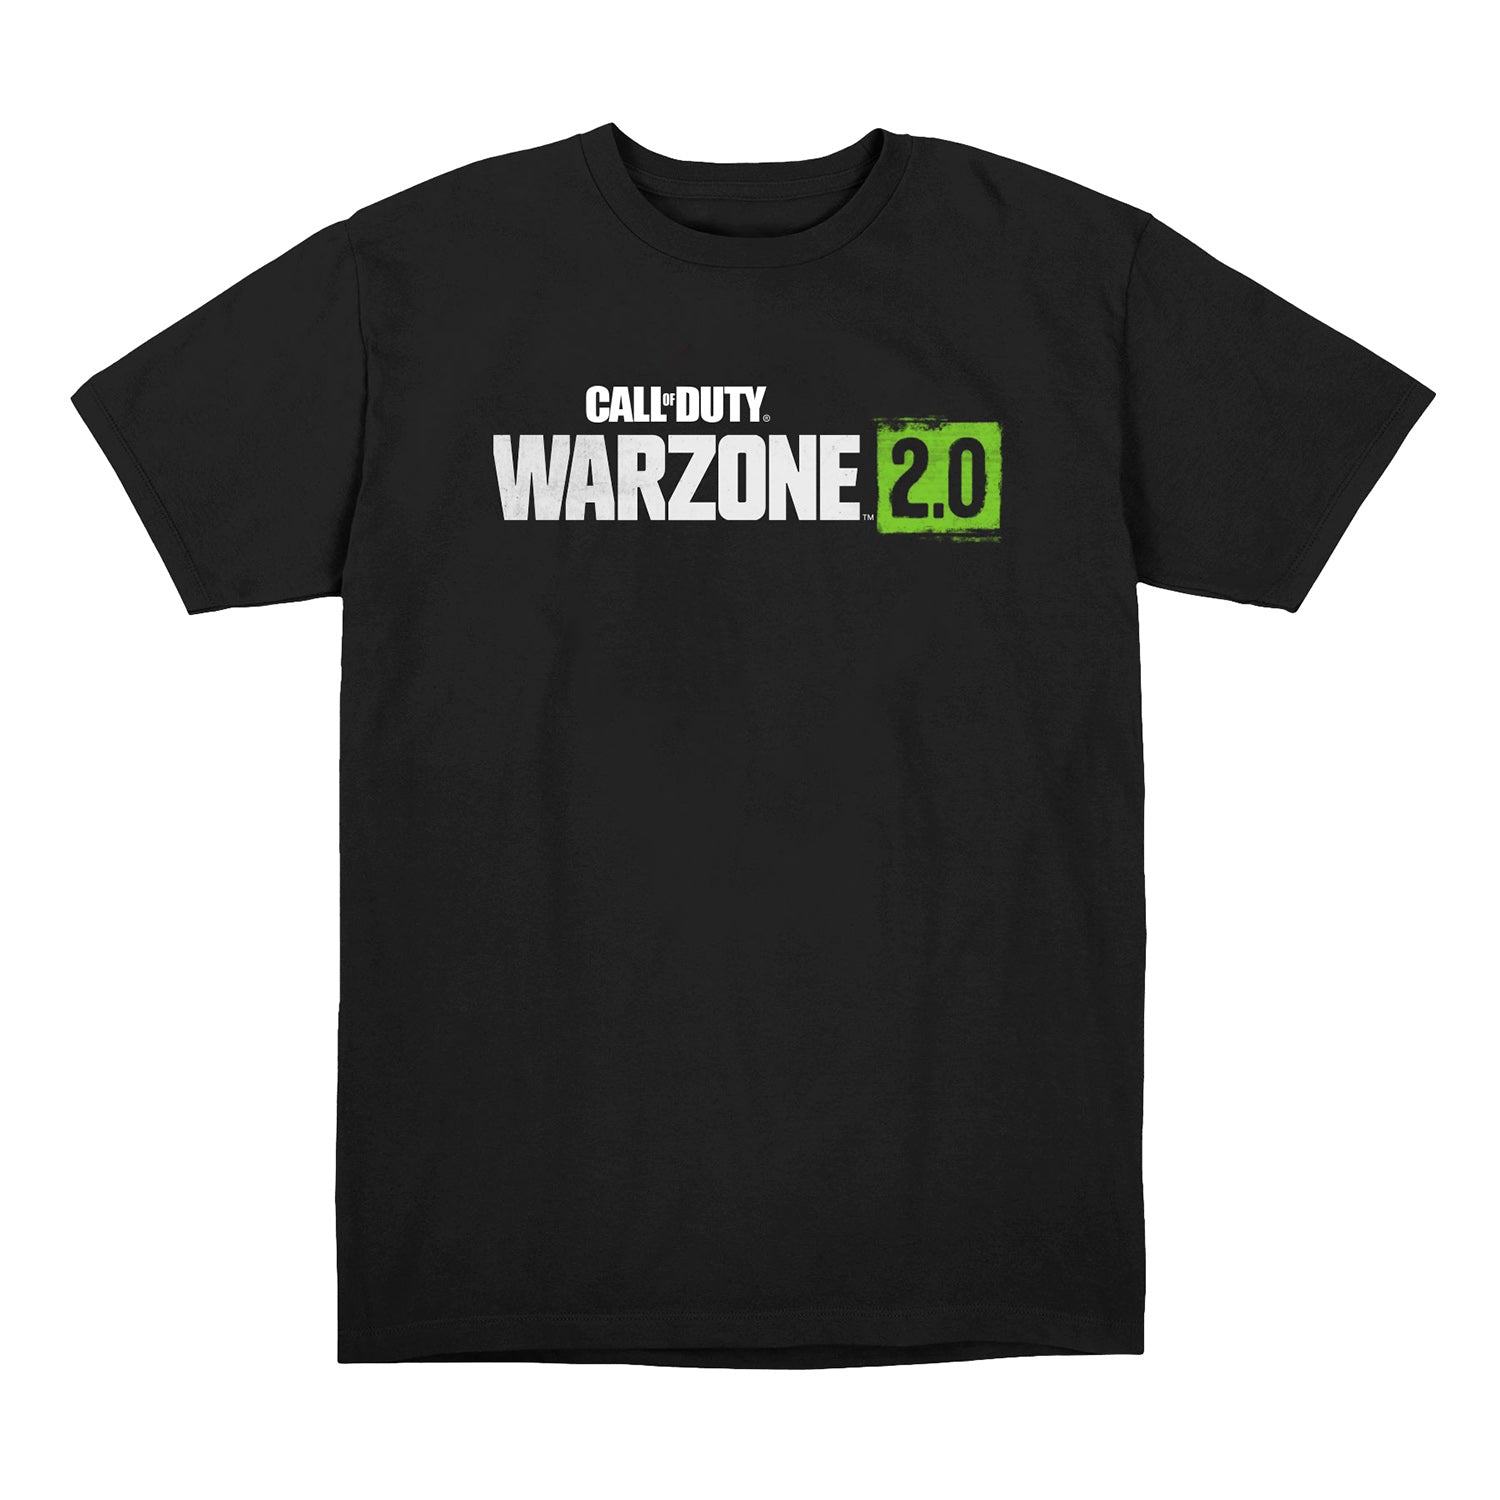 Call of Duty Black Warzone 2.0 T-Shirt - Front View